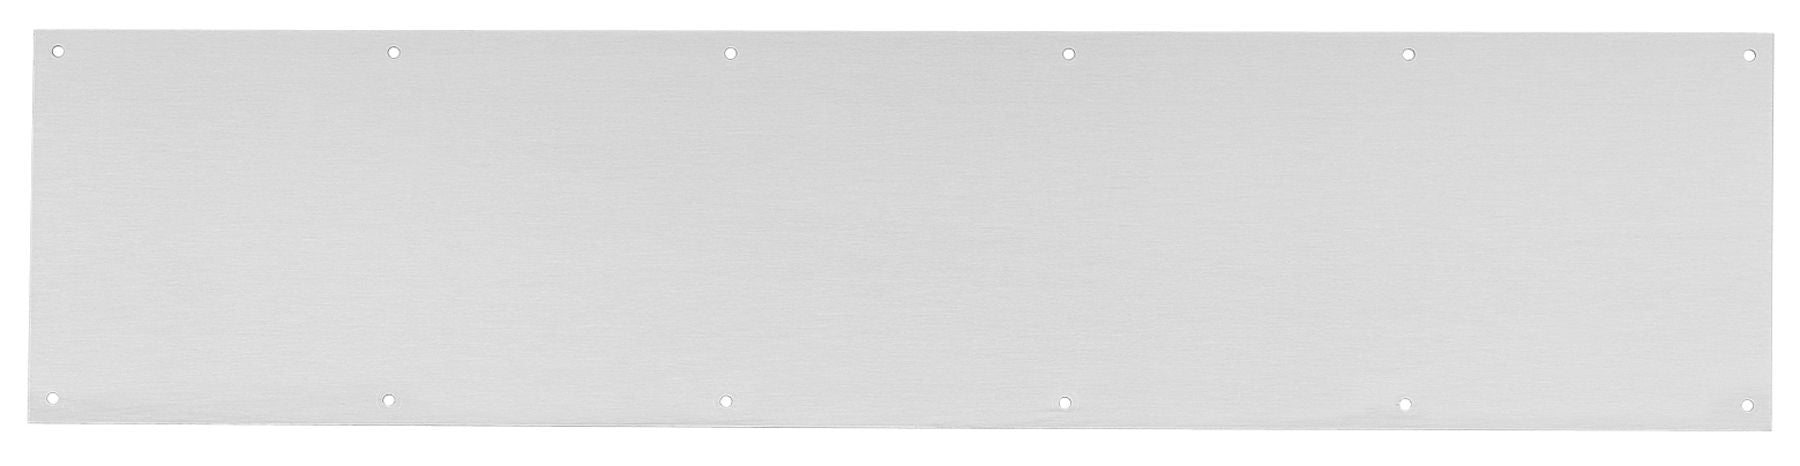 Ives Commercial 840032D840 8" x 40" Kick Plate Satin Stainless Steel Finish